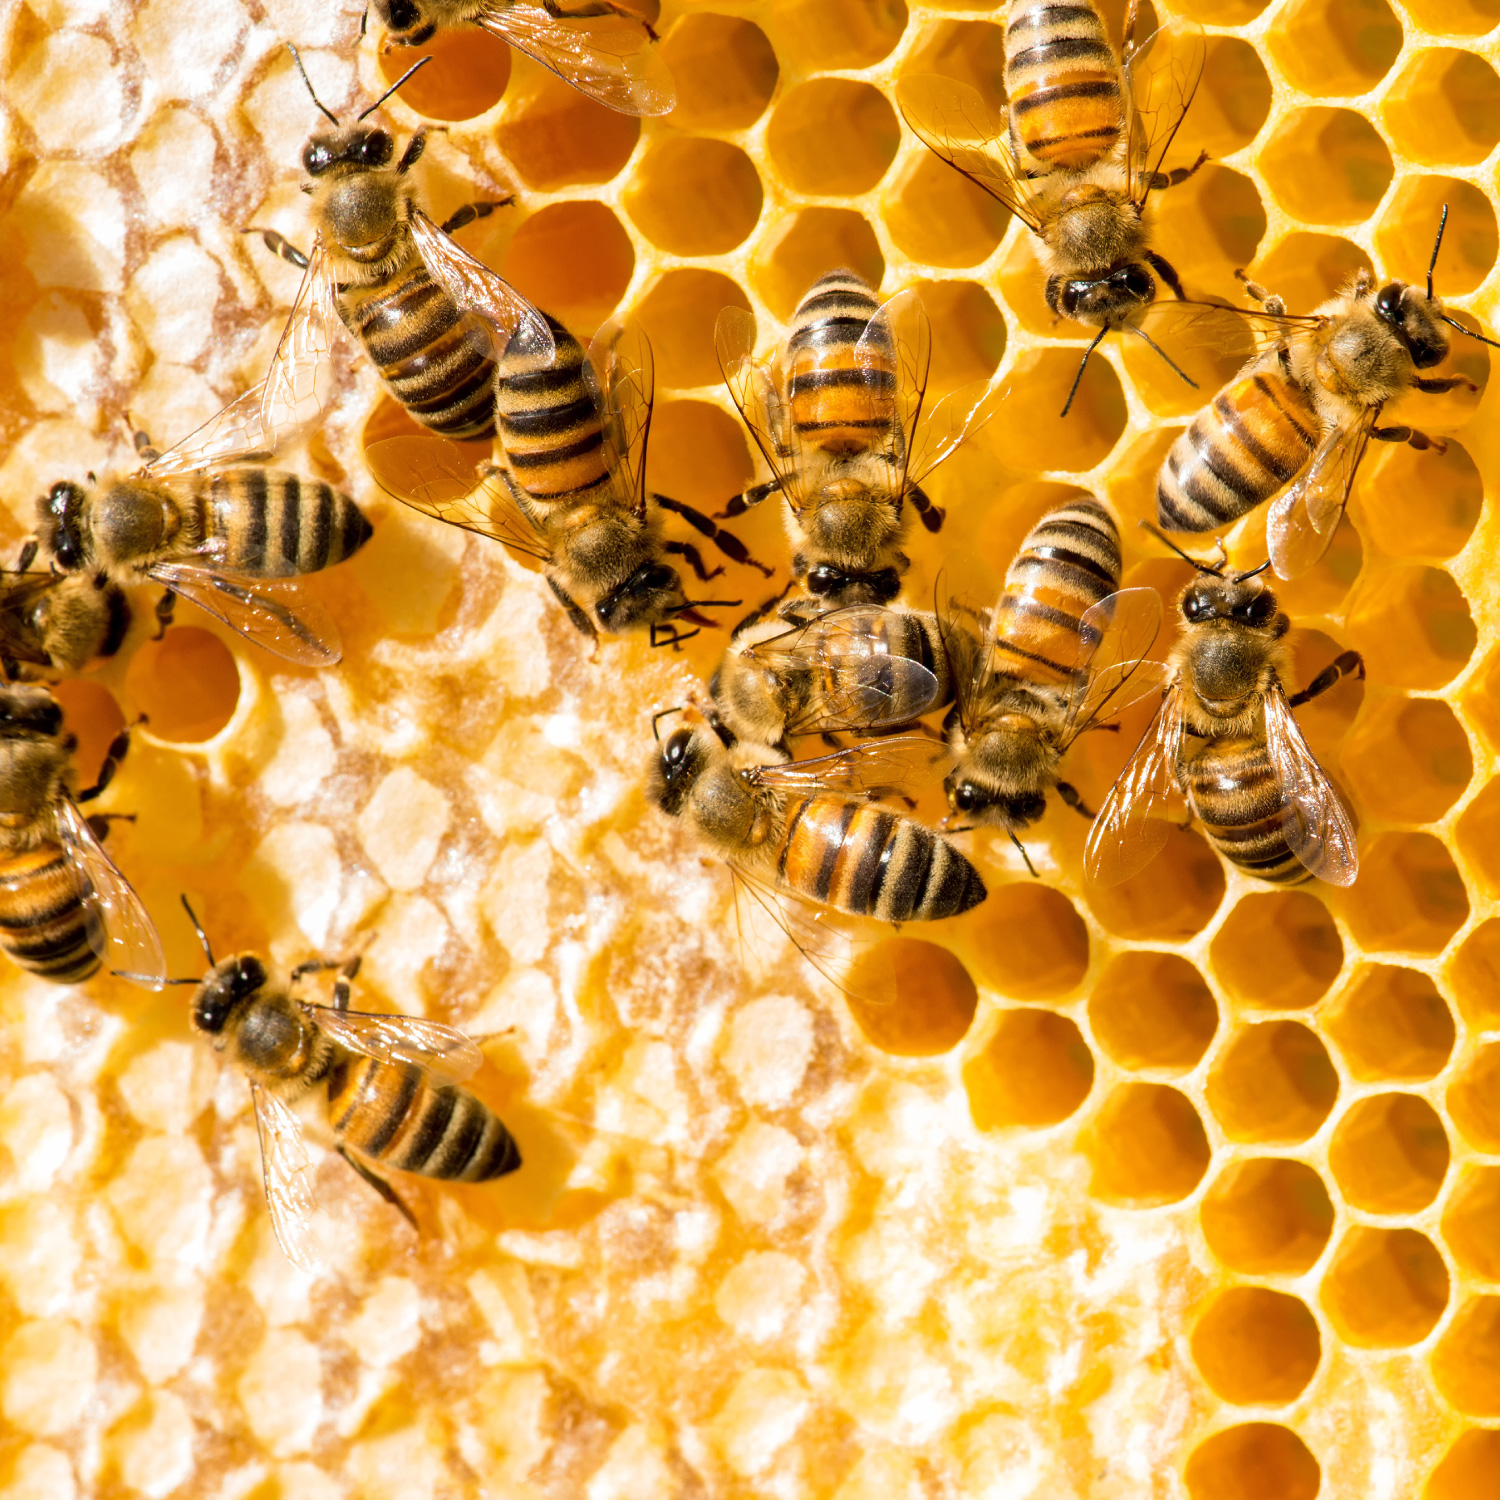 Closeup of bees on honeycomb in an apiar